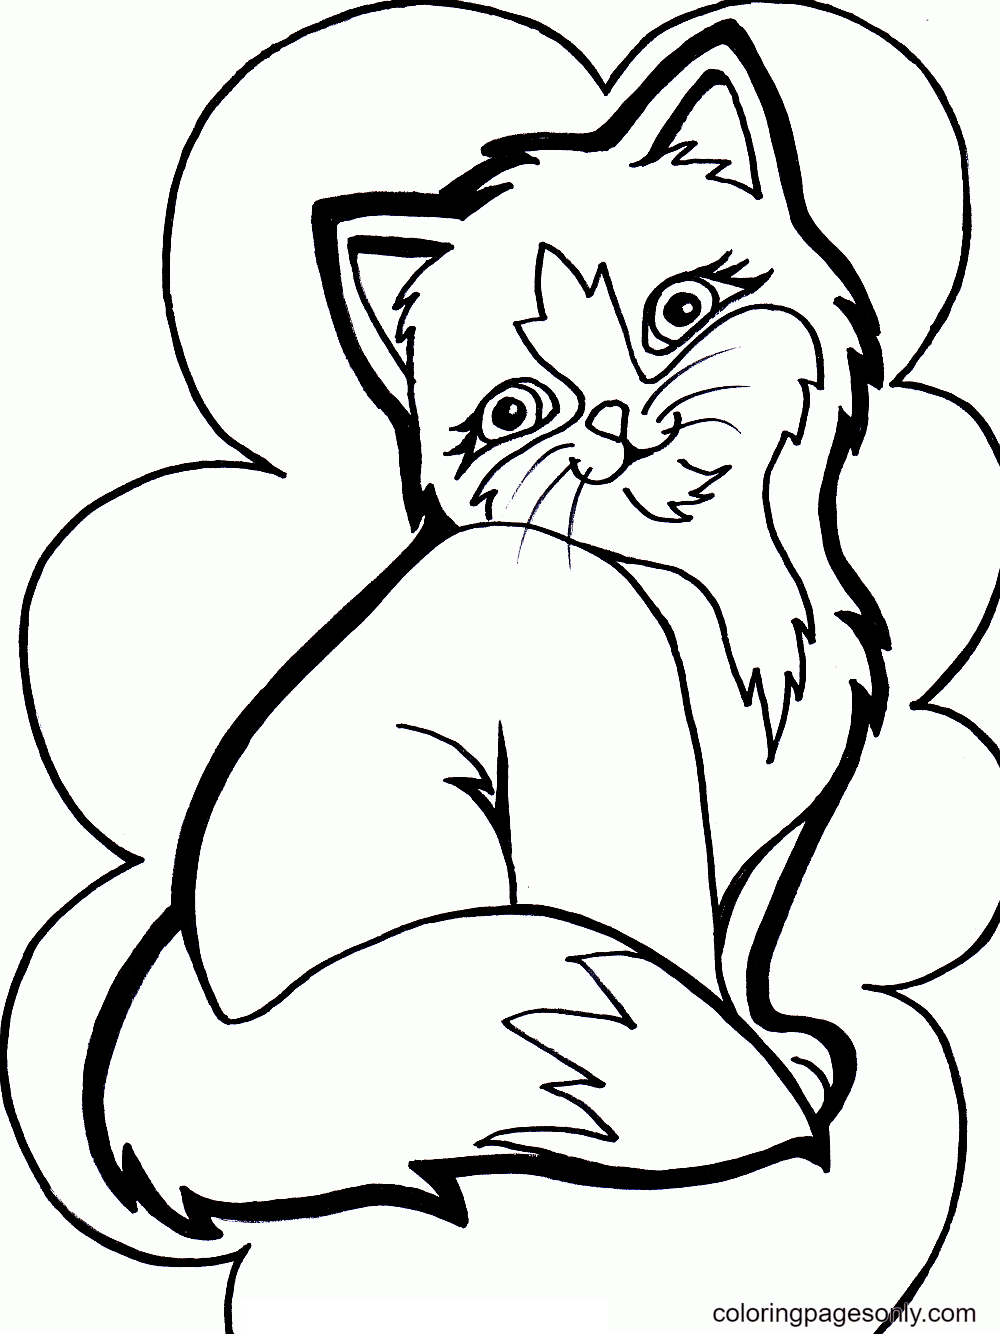 Kitten Have Amazing Fur Coloring Page